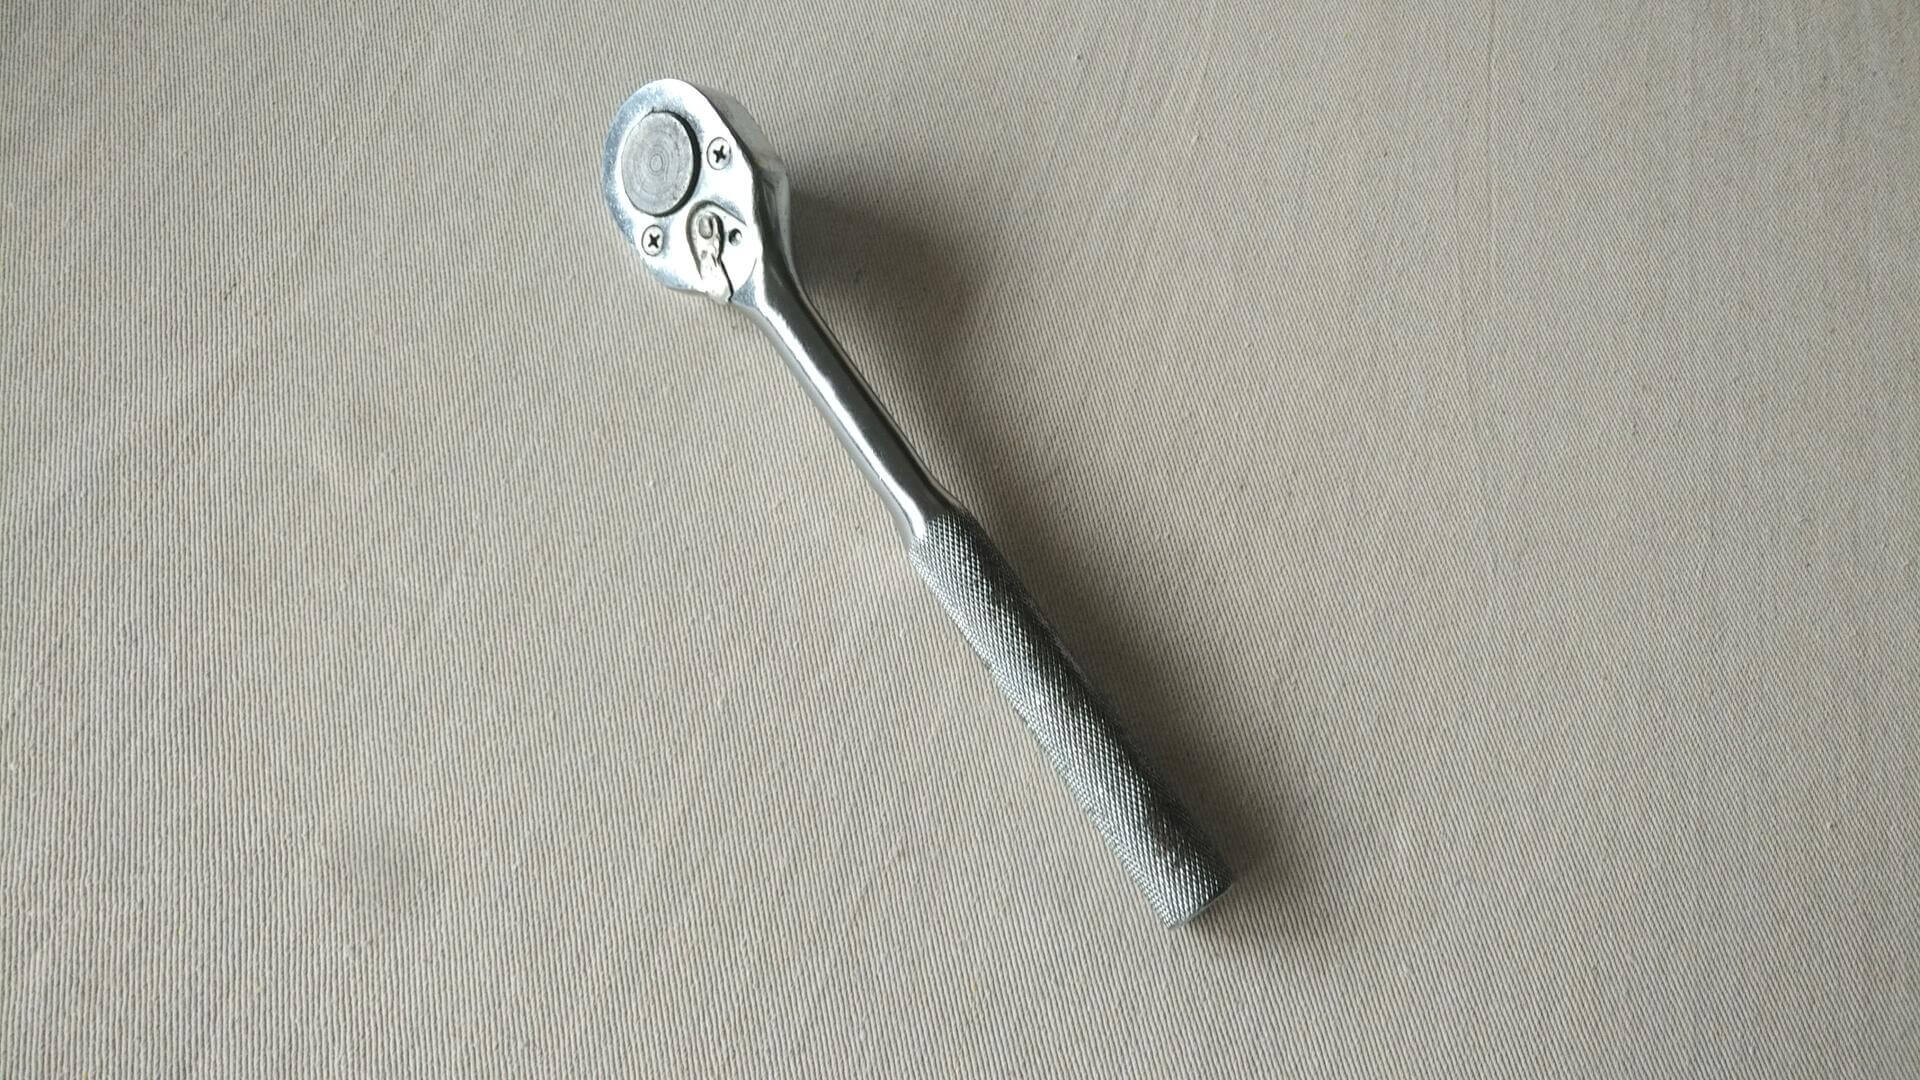 Nice antique Proto 5449 1/2" ratchet wrench w pear head and knurled handle 10.5" long. Vintage made in USA collectible automotive & mechanic hand tools.